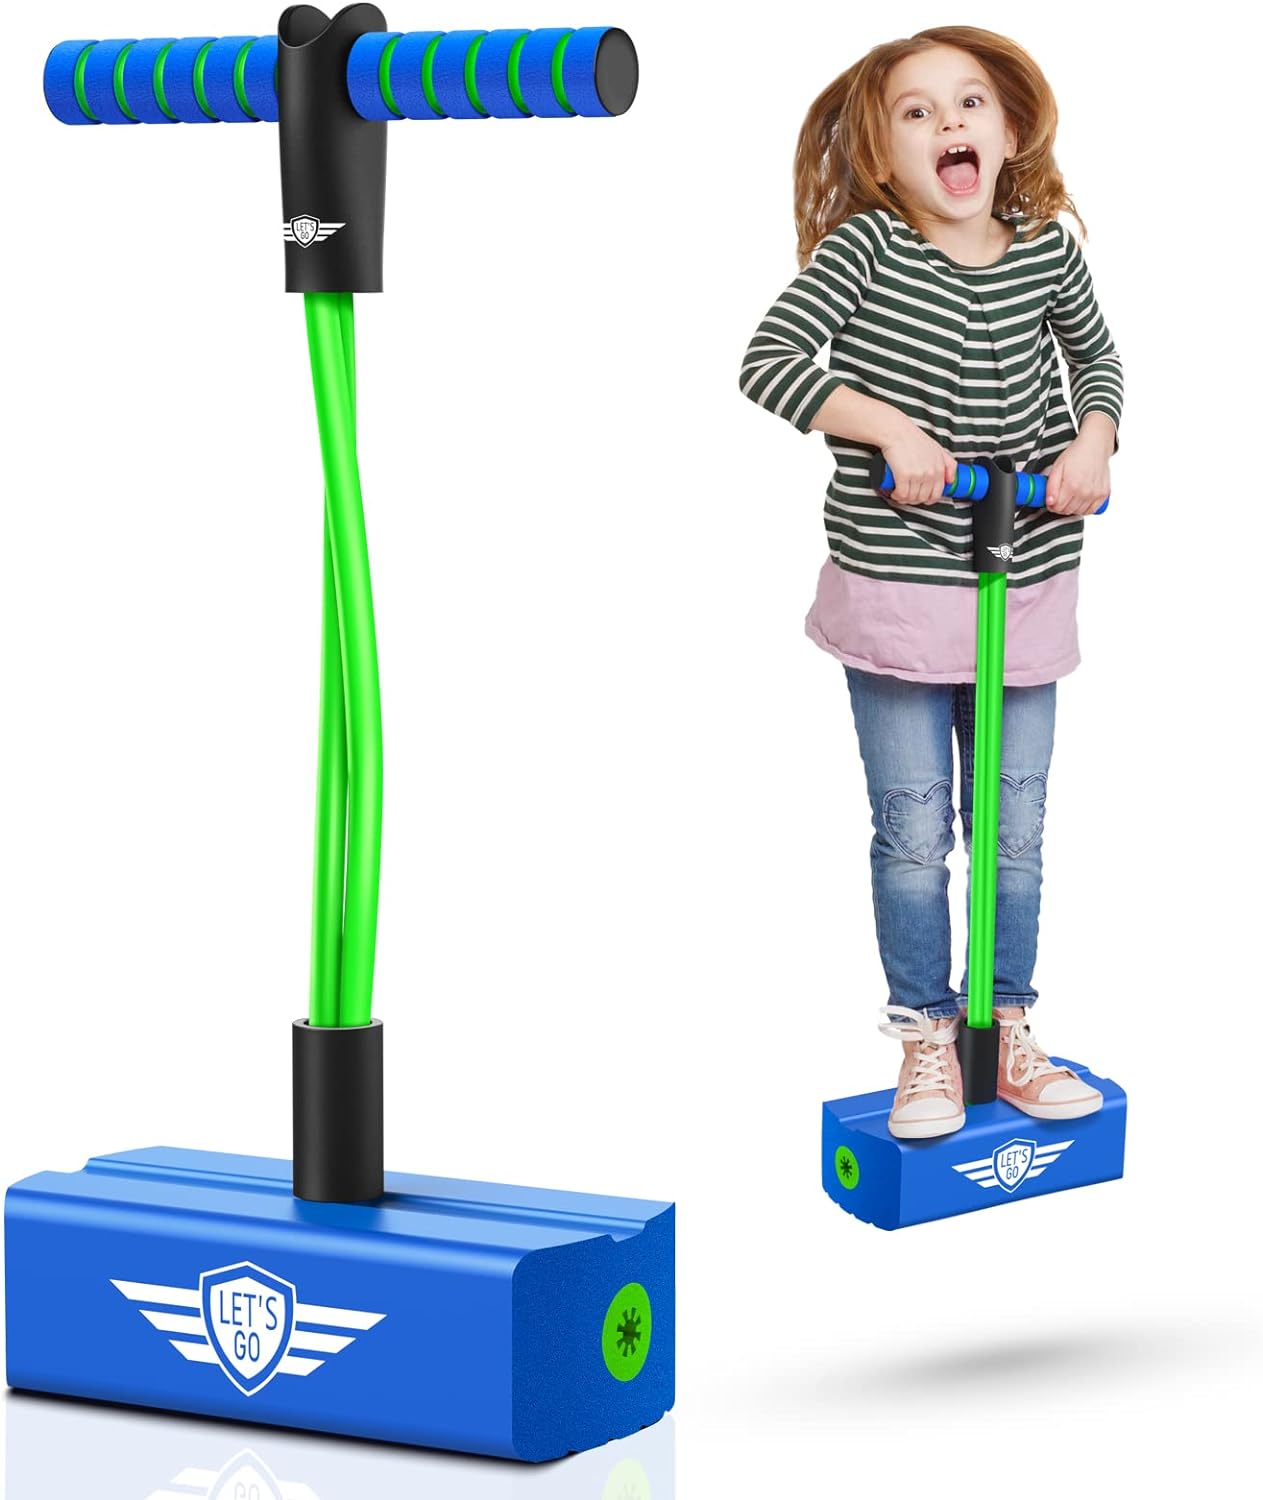 Best Pogo Hoppers for Kids in 2022: Which Jumping Toy is the Ultimate for Playtime Fun